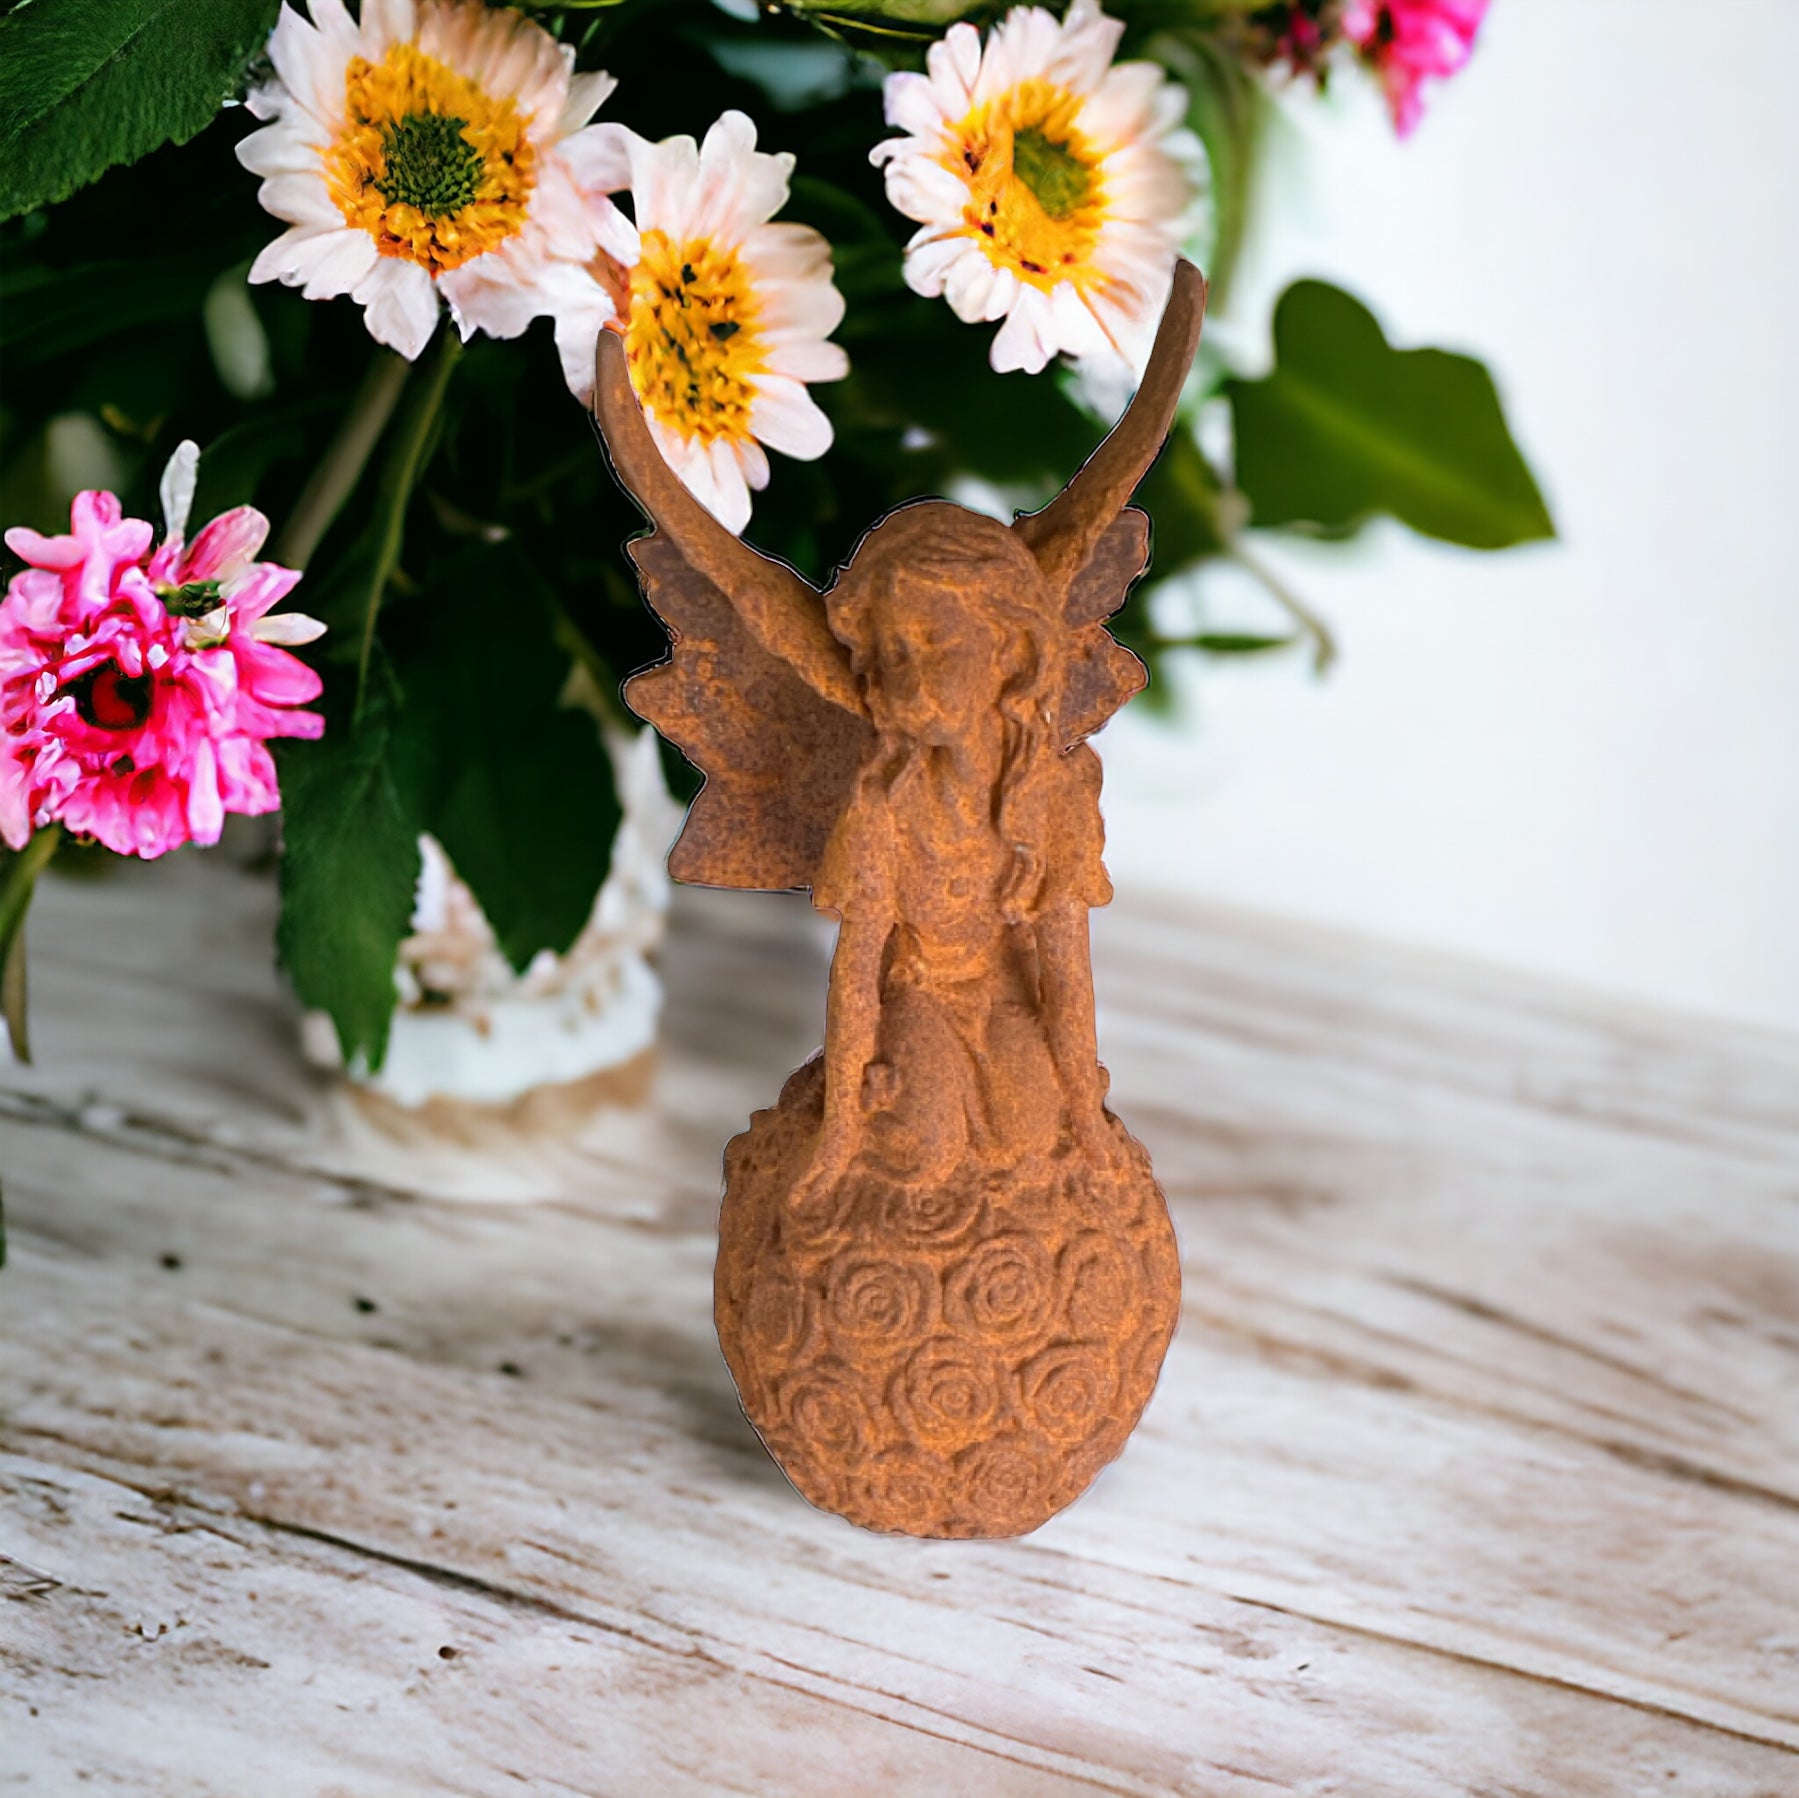 Fairy Flowers Ball Rustic Cast Iron Garden - The Renmy Store Homewares & Gifts 